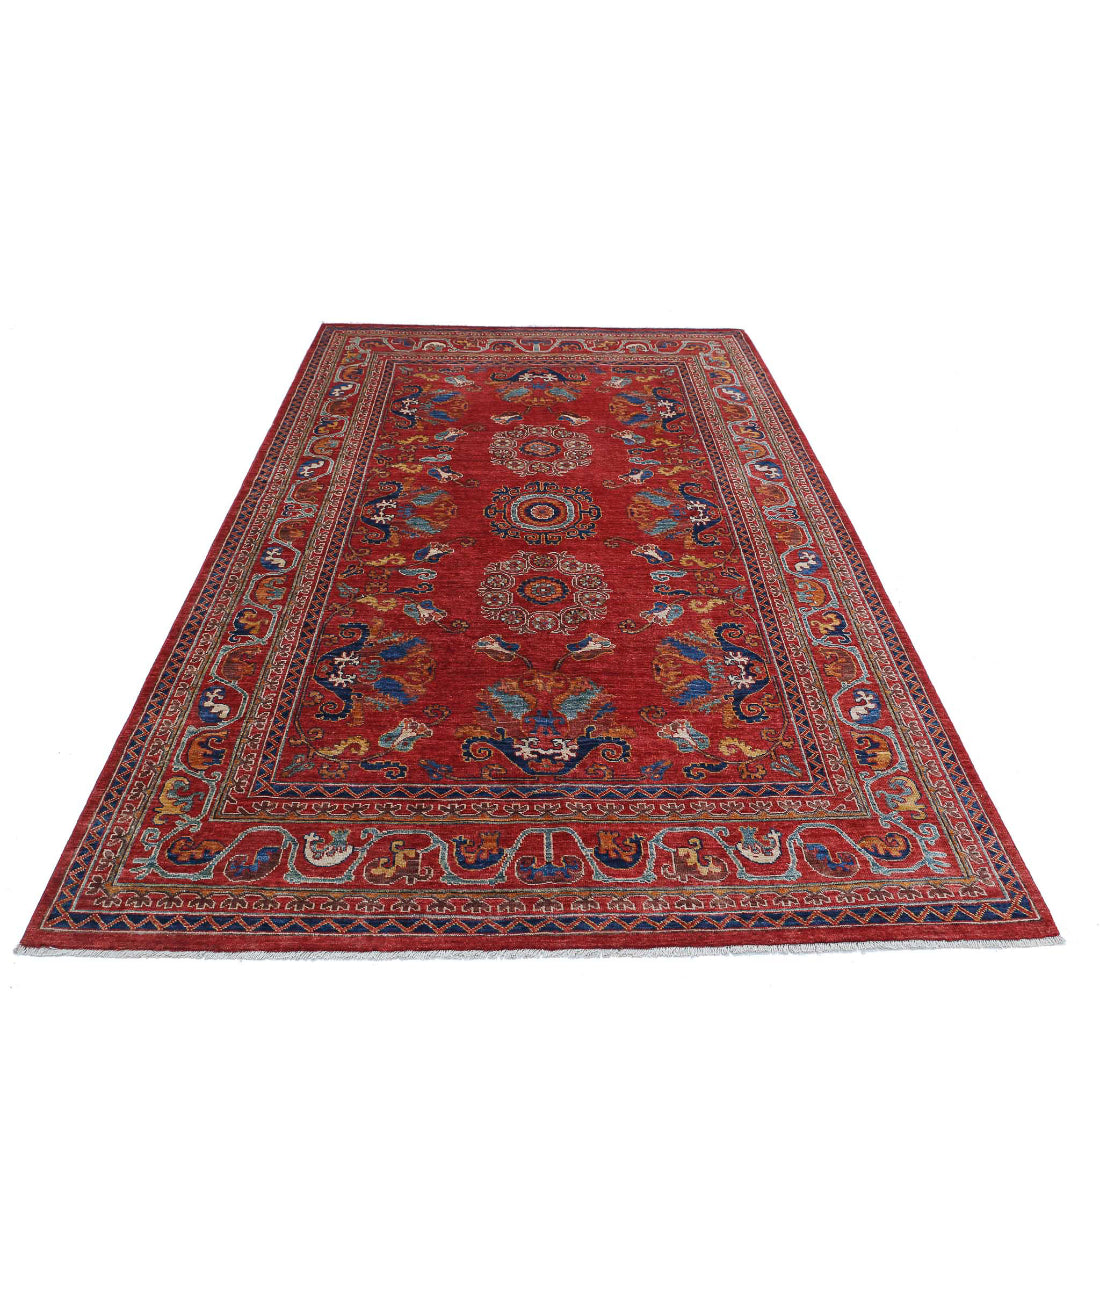 Hand Knotted Nomadic Caucasian Humna Wool Rug - 5'10'' x 9'1'' 5'10'' x 9'1'' (175 X 273) / Red / Gold